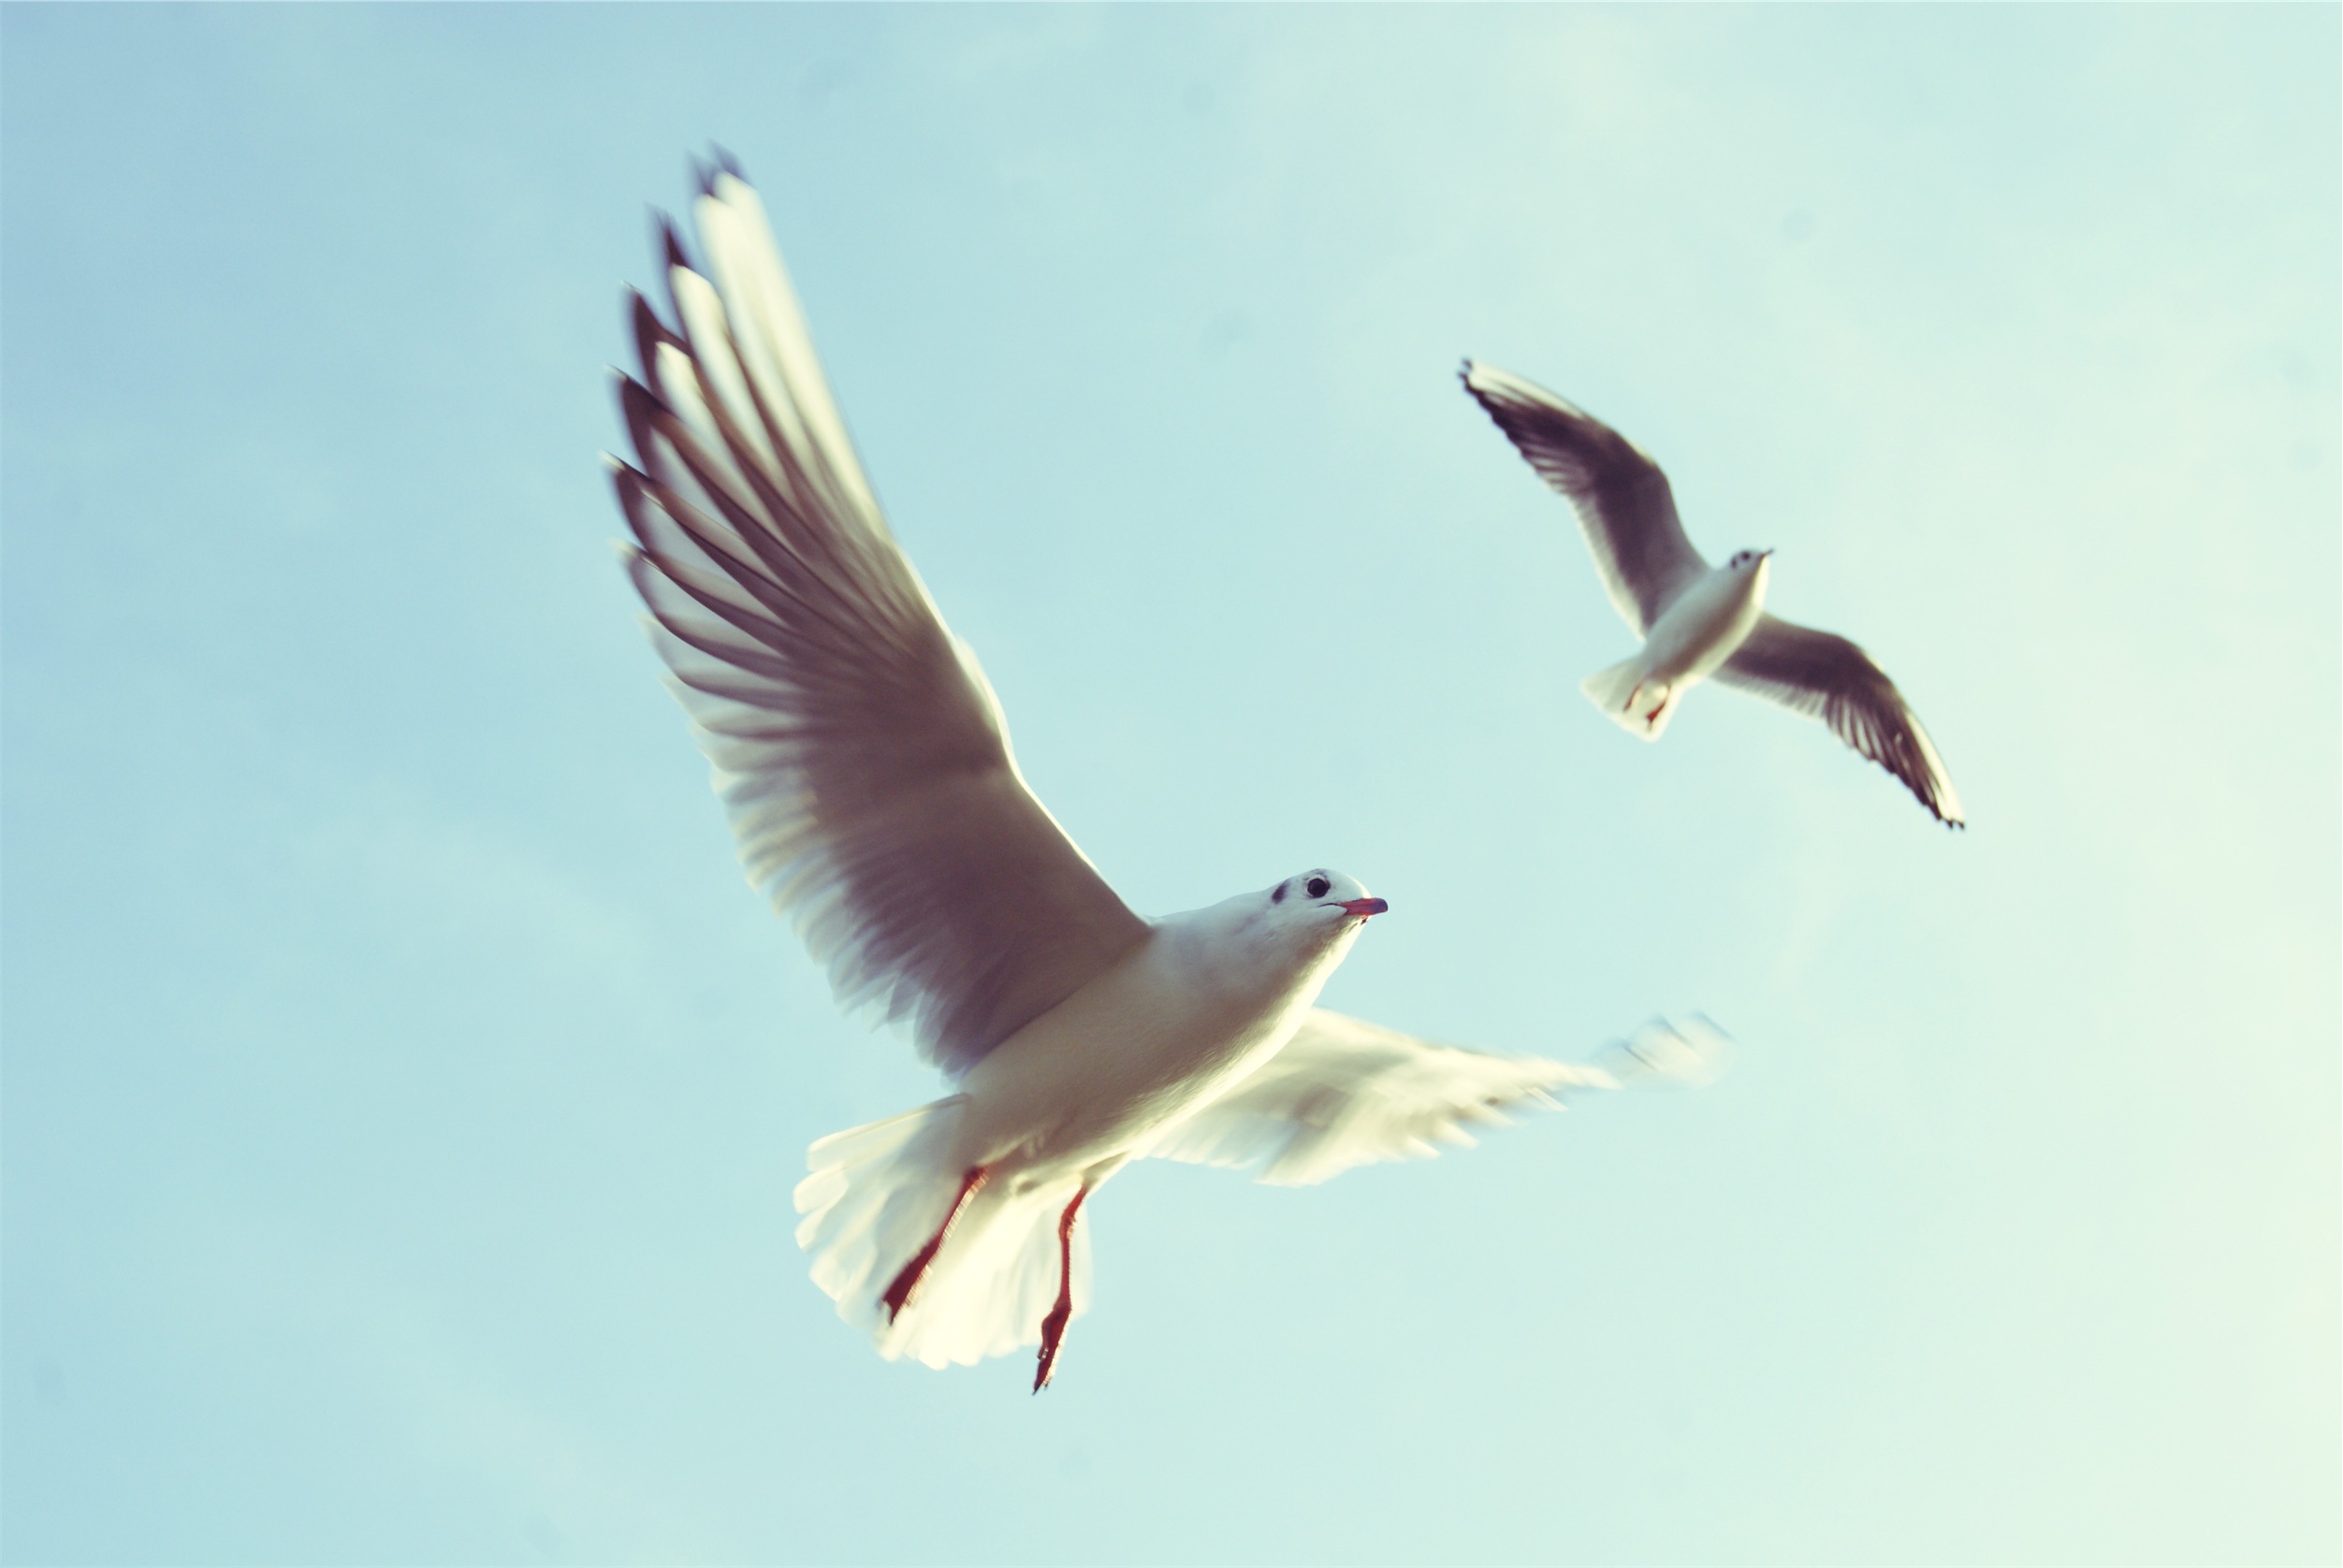 Two seagulls flying in the air image - Free stock photo - Public ...